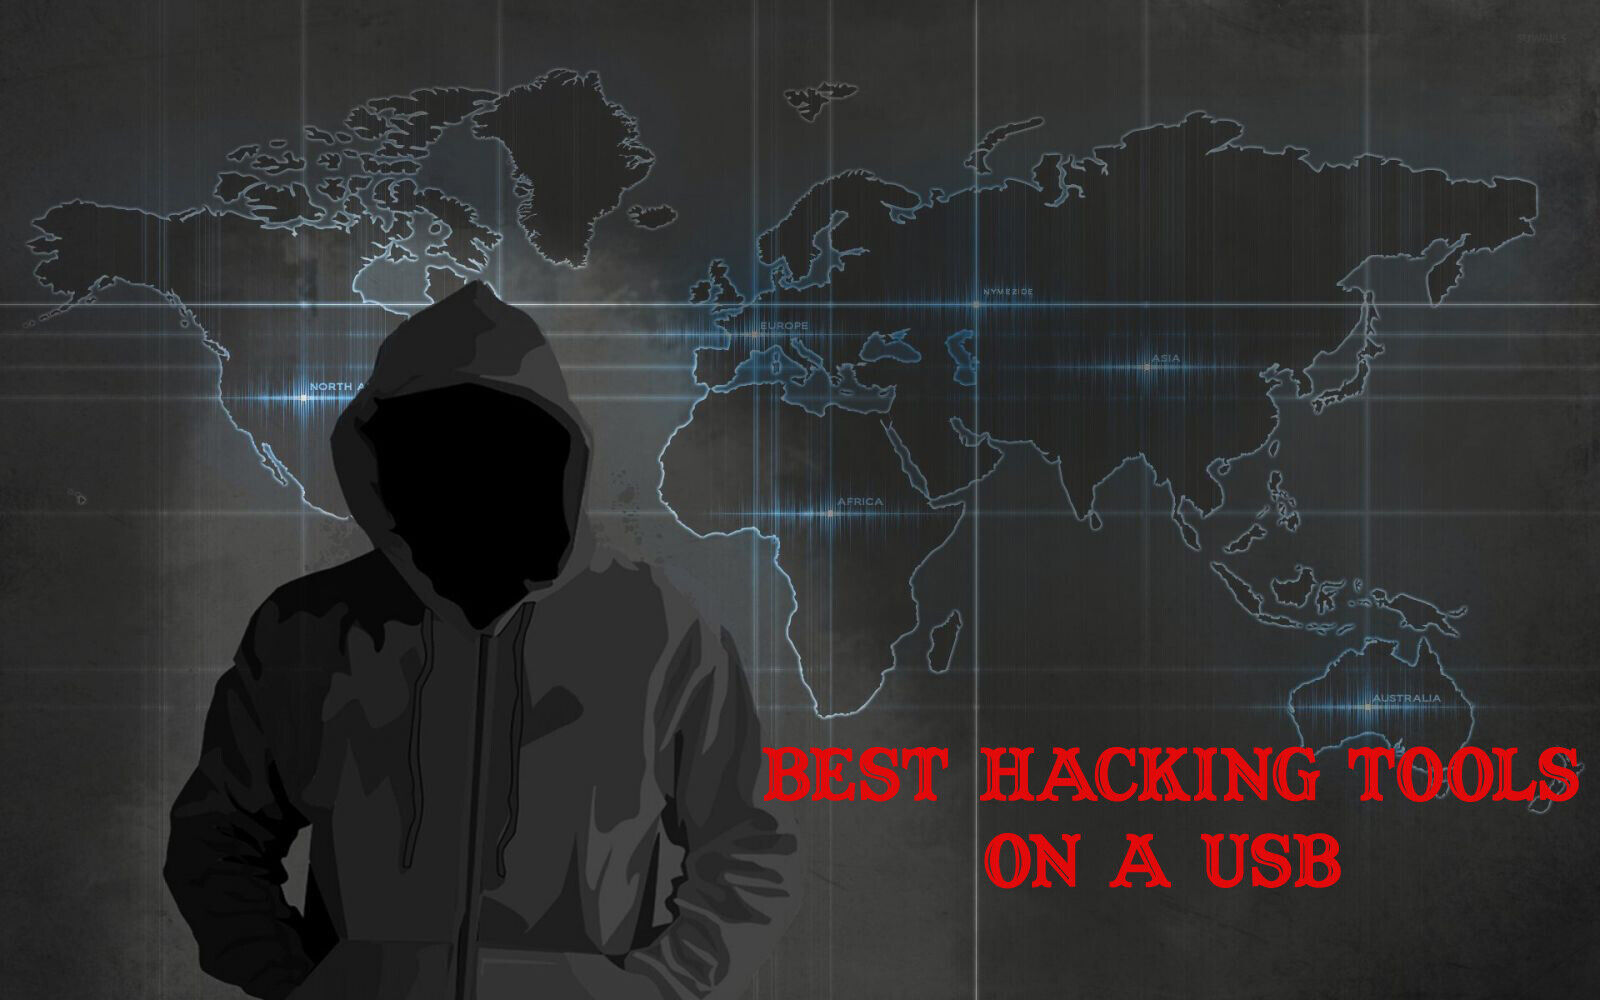 HACKING USB BOOT PRO HACKING OPERATING SYSTEM BUNDLE 1100+TOOLS HACK ANY PC FIX€